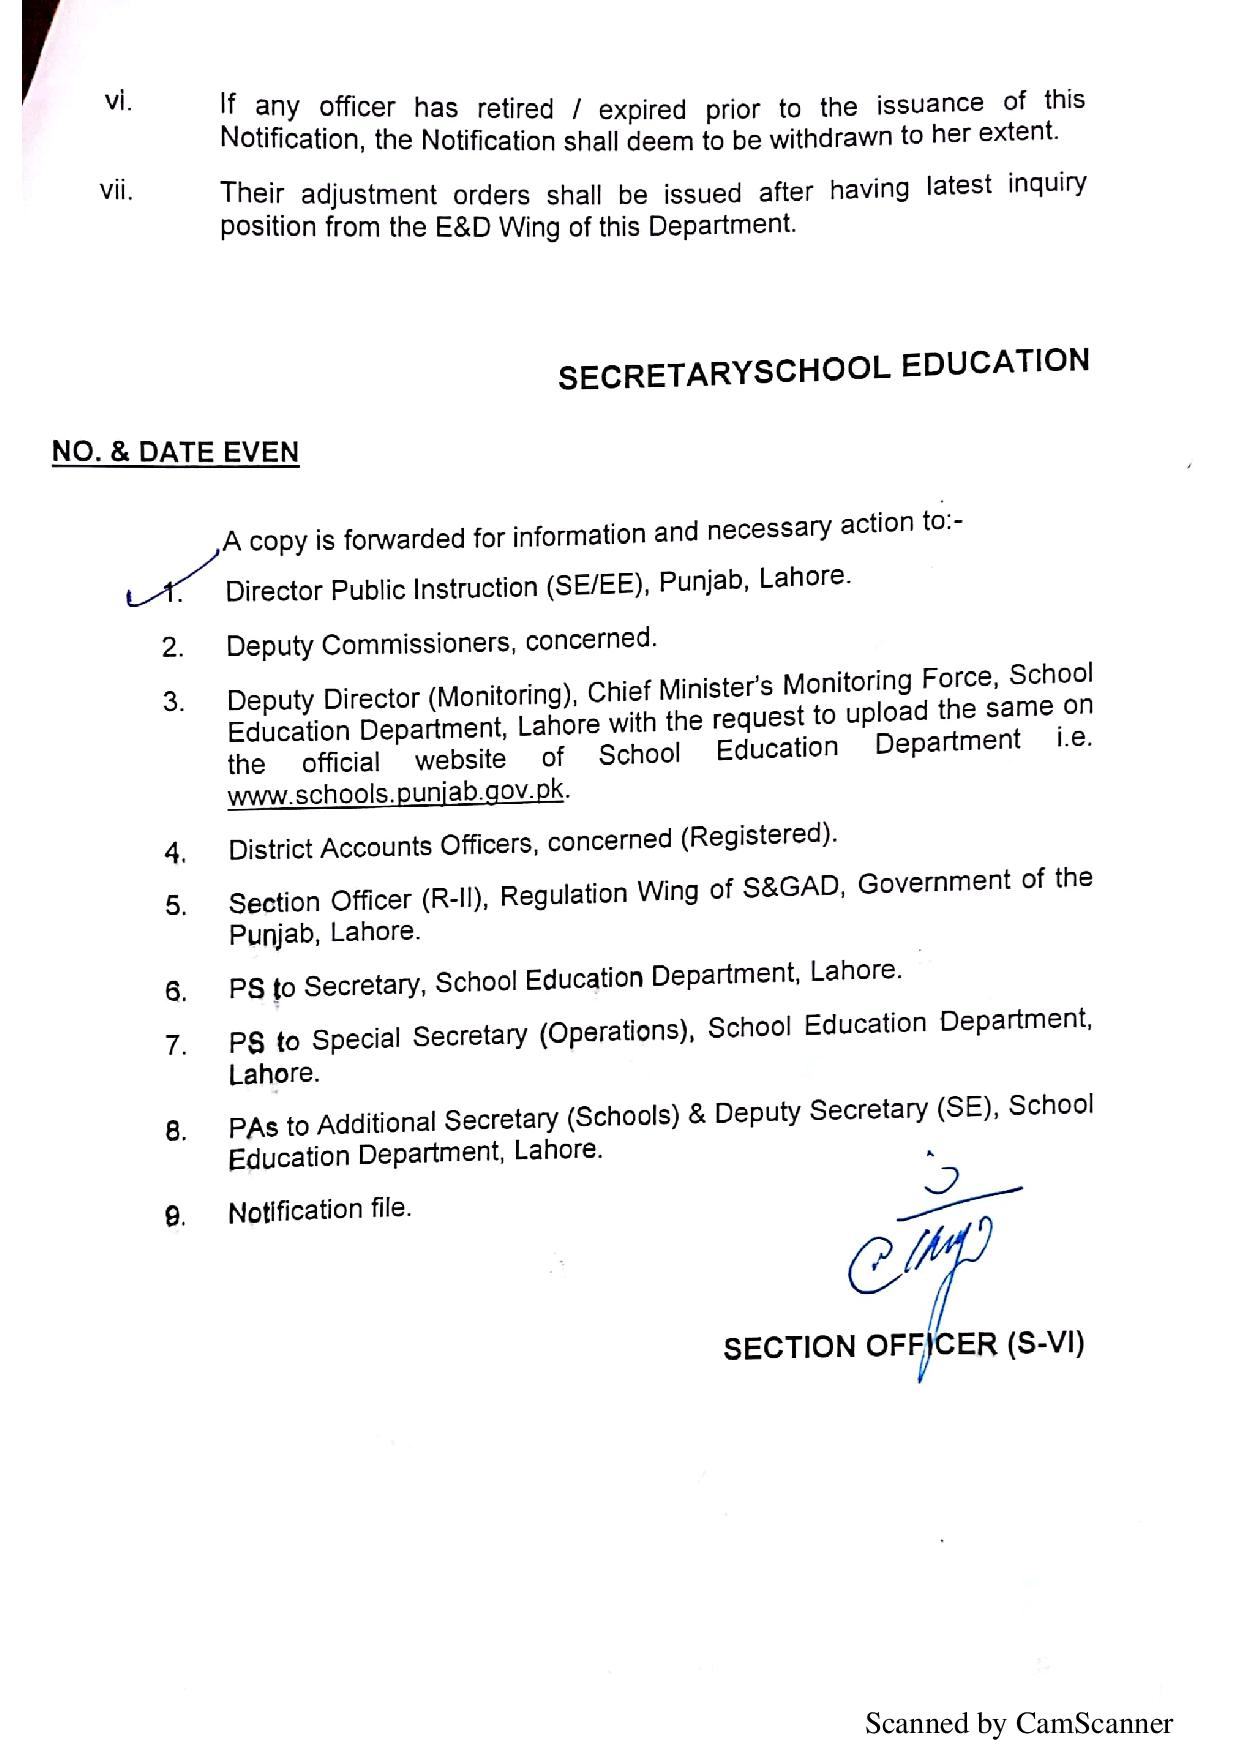 REGULAR PROMOTION of MALE FROM BPS-17 TO BPS-18 IN Punjab School Education Department